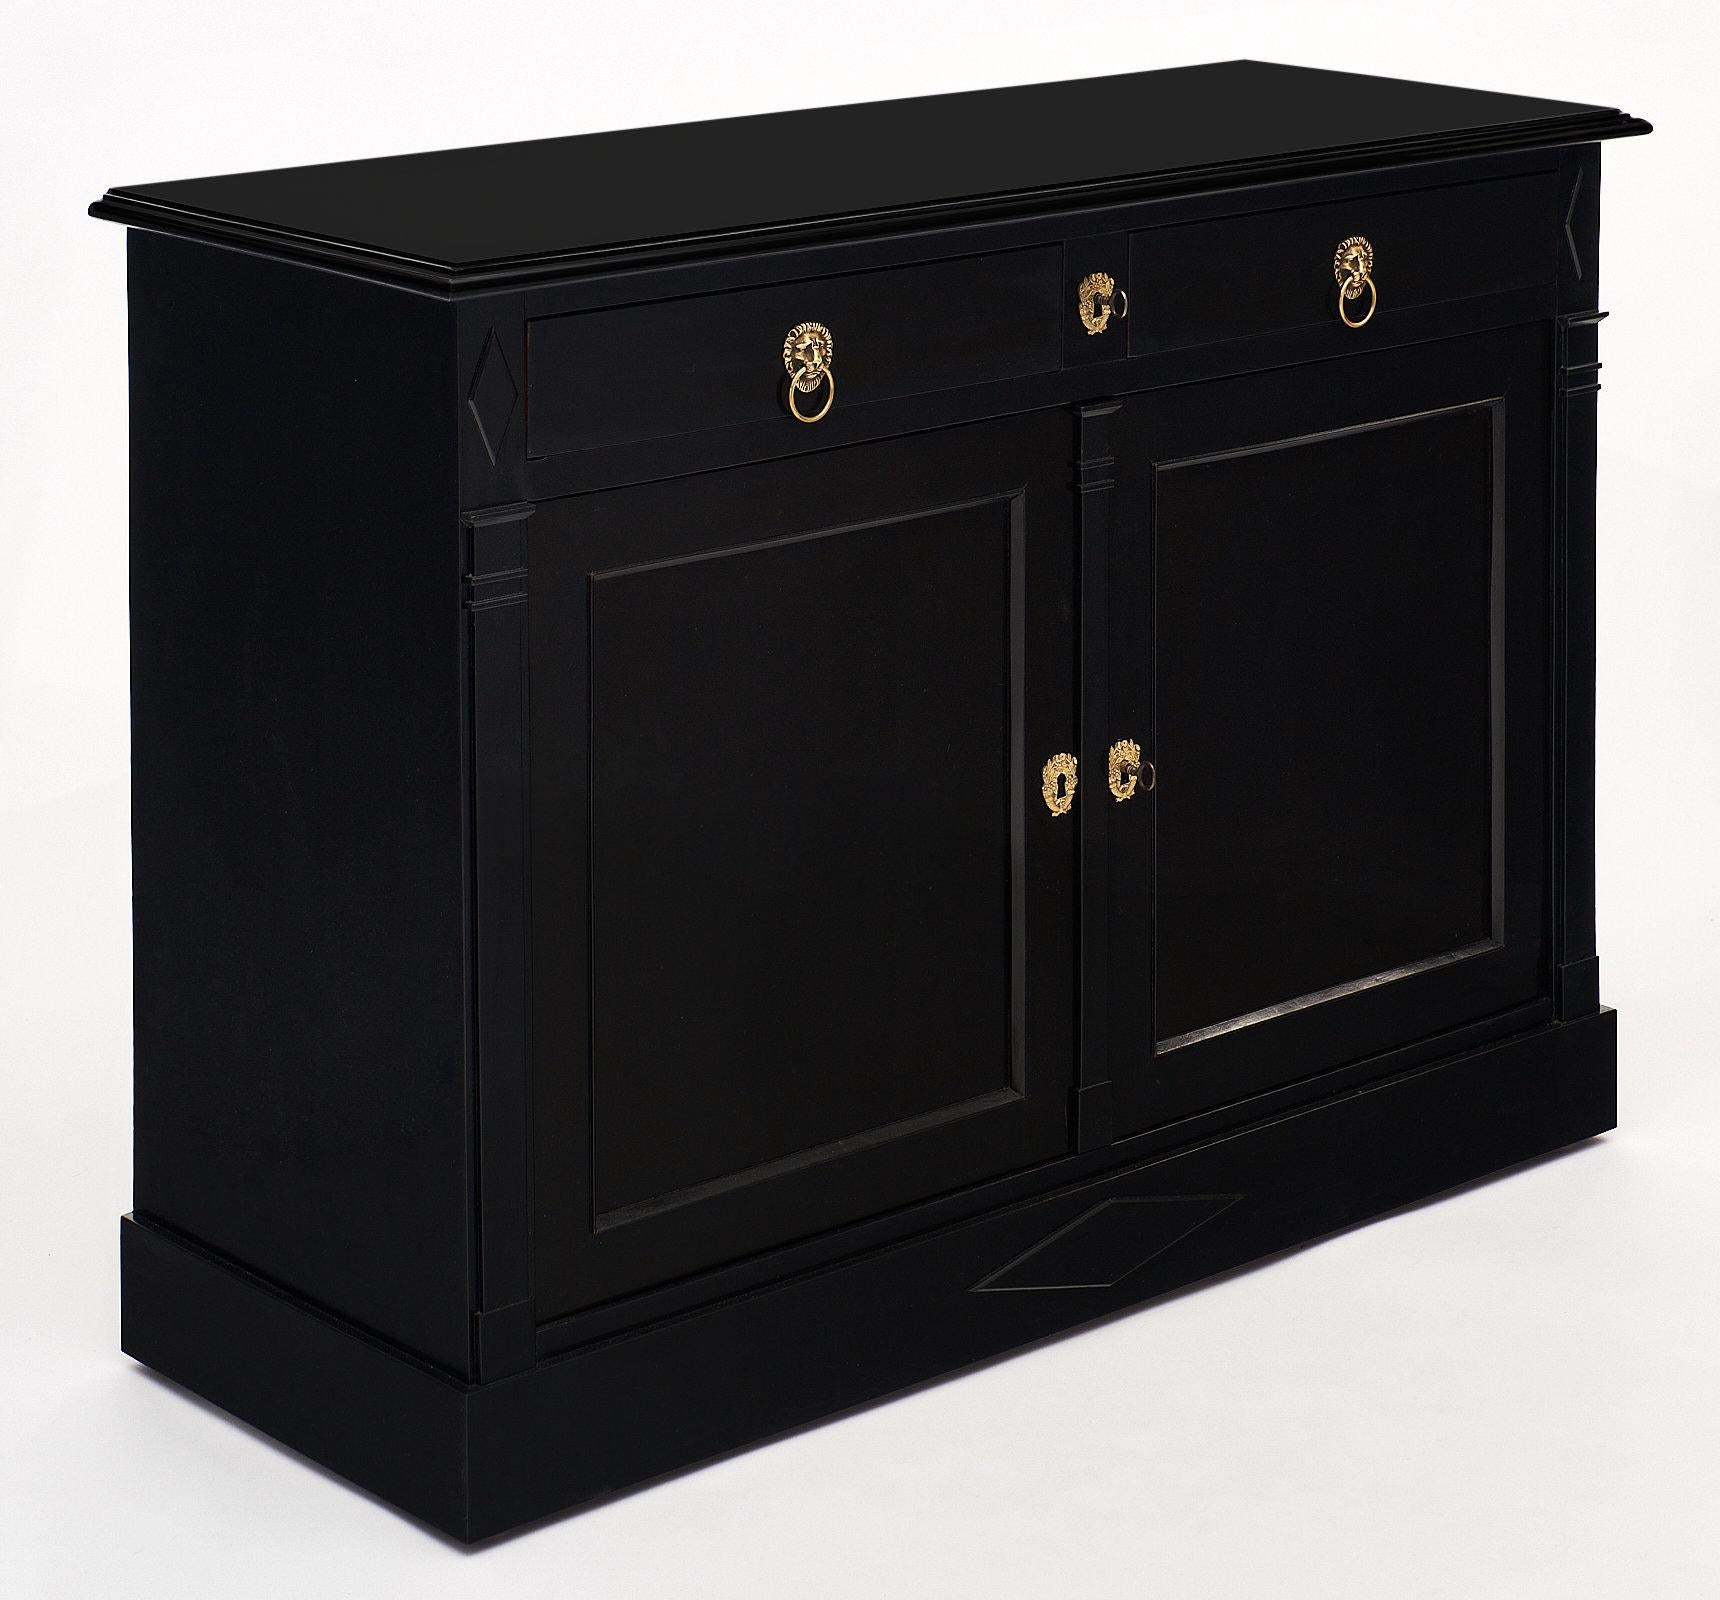 Ebonized Directoire style buffet with two doors and two drawers, finished with a lustrous French polish. The piece boasts two brass lion head pulls and three unique stylized brass escutcheons, along with two working keys. The top corners of the